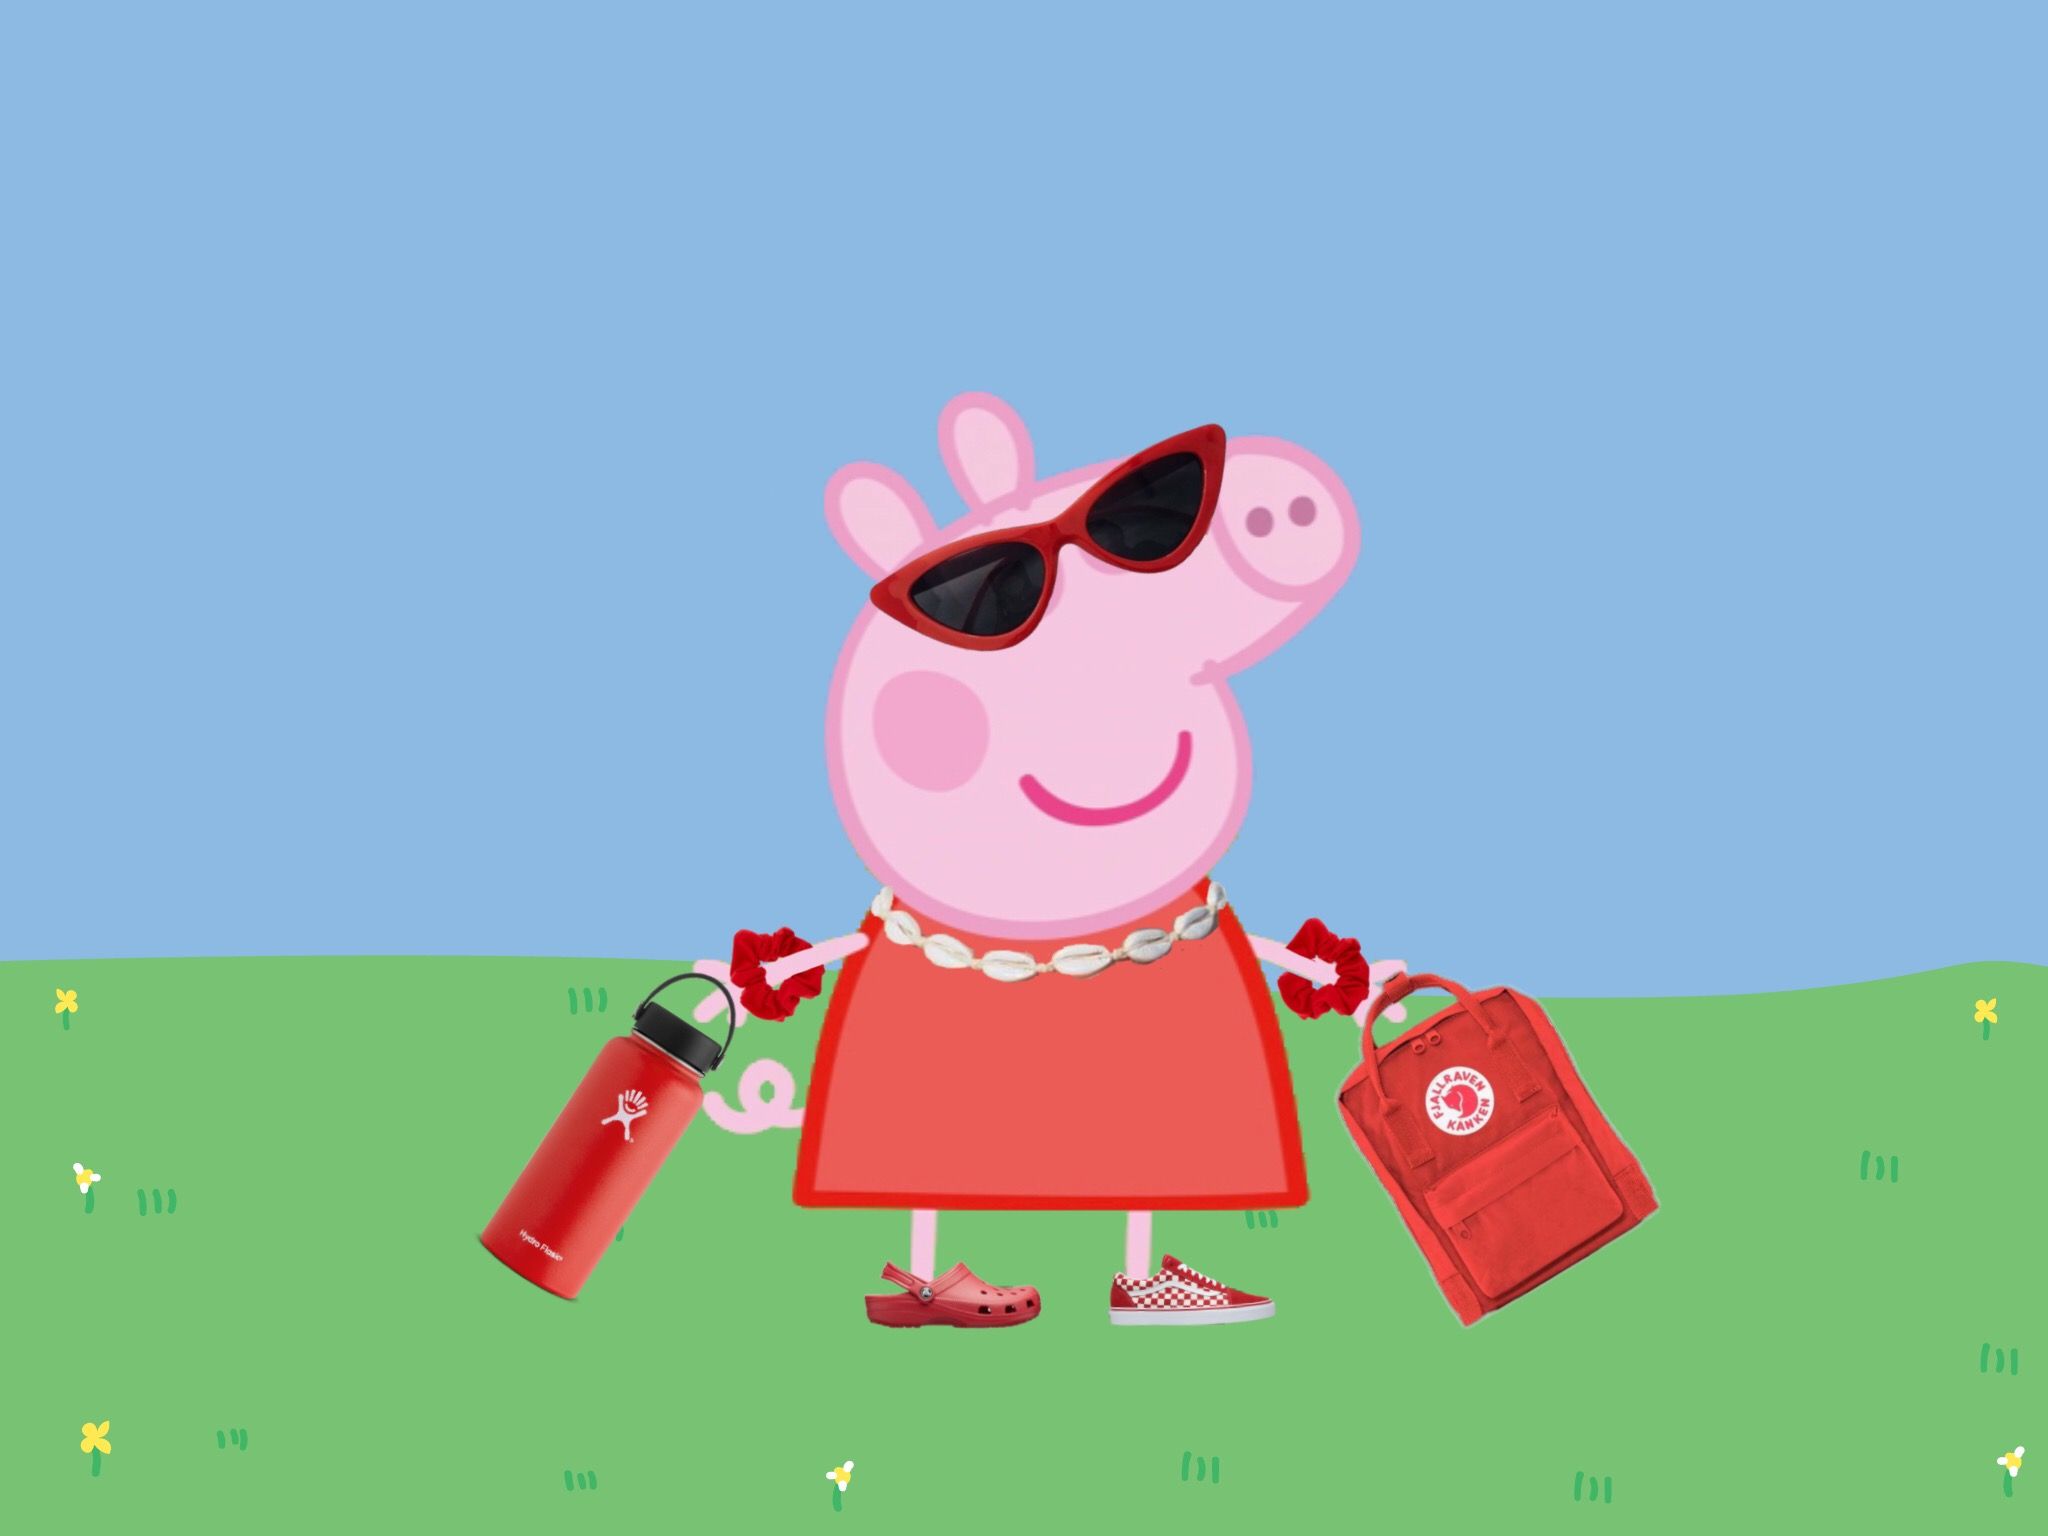 Peppa Pig in a red dress and sunglasses holding a red bag and a red water bottle - Peppa Pig